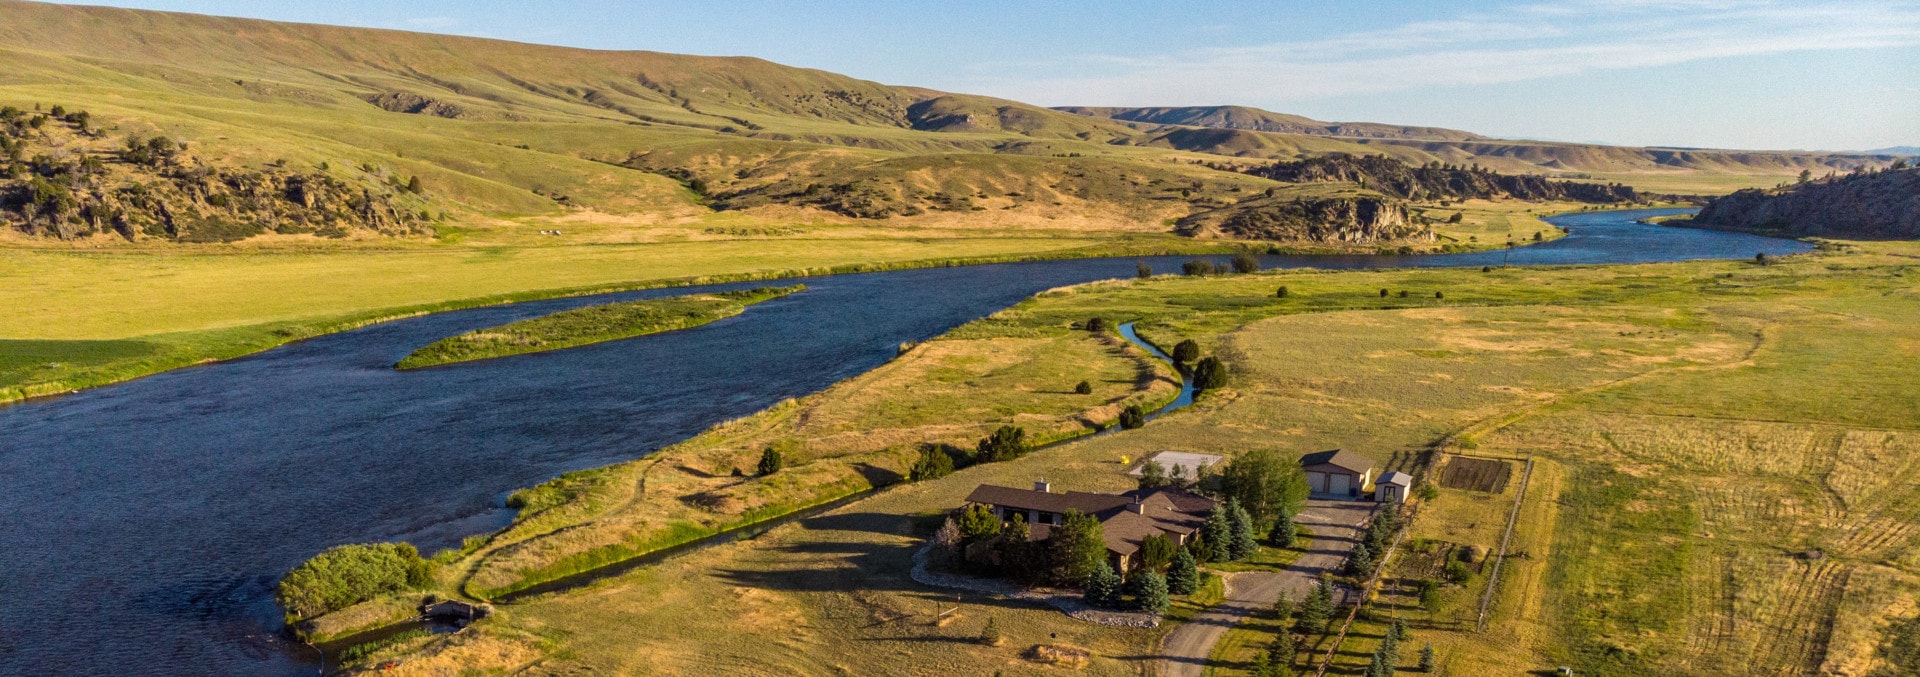 montana fishing property for sale bison view river ranch